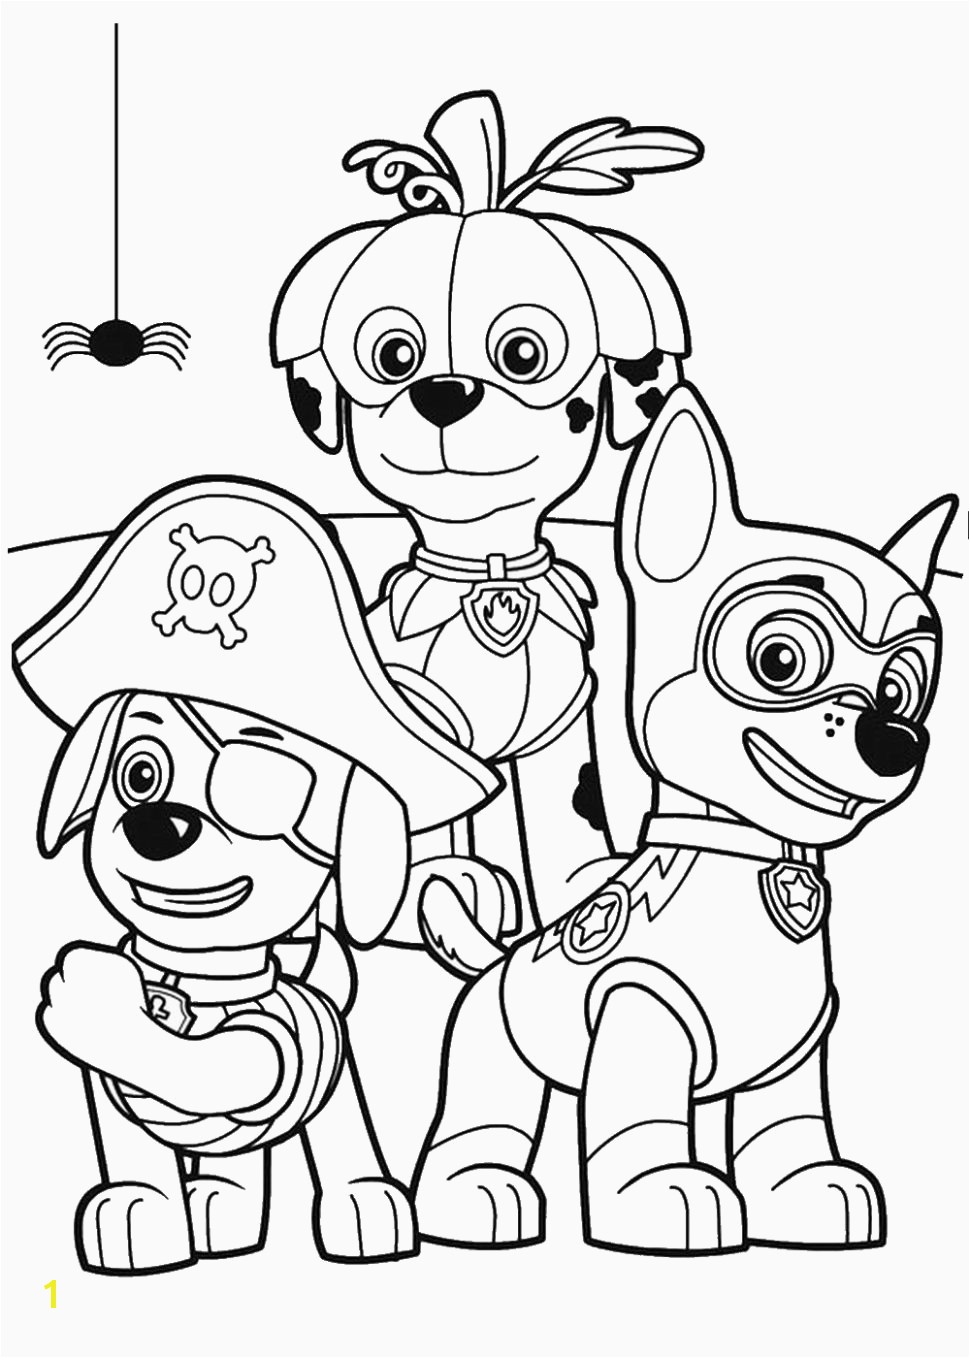 Nick Jr Coloring Pages Nick Jr Coloring Sheets Fresh Nick Coloring Pages Free Collection